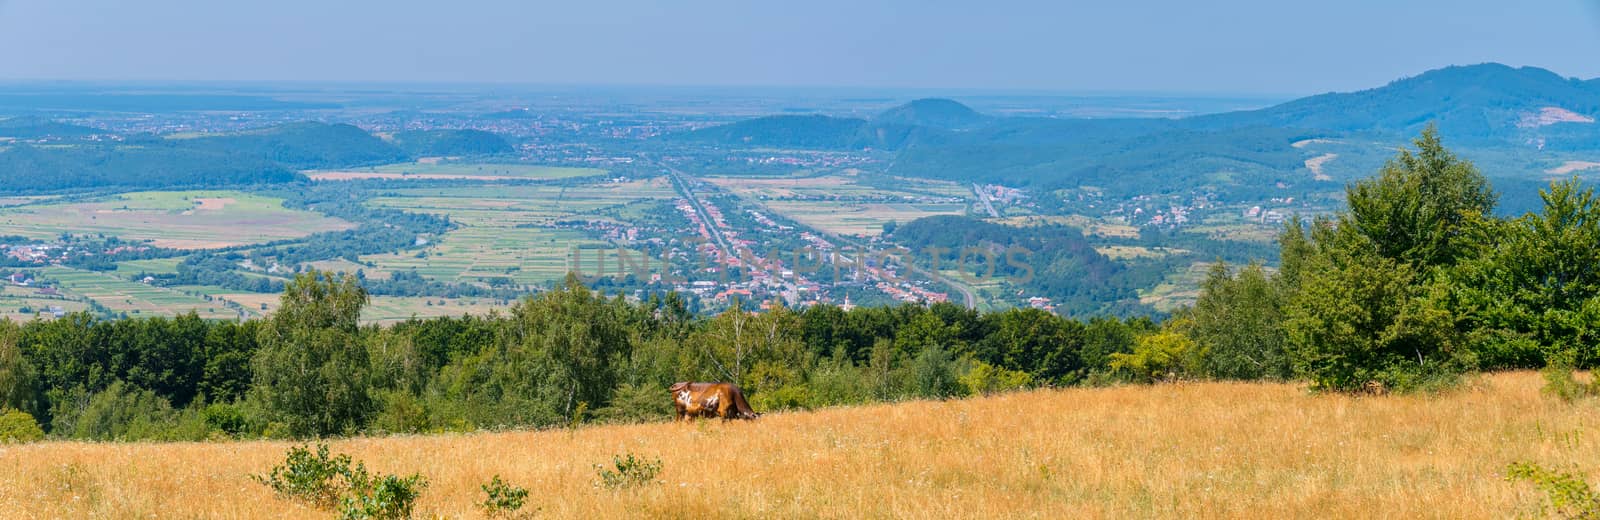 panorama of pasture with brown cow and distant cities in the valleys between the hills by Adamchuk